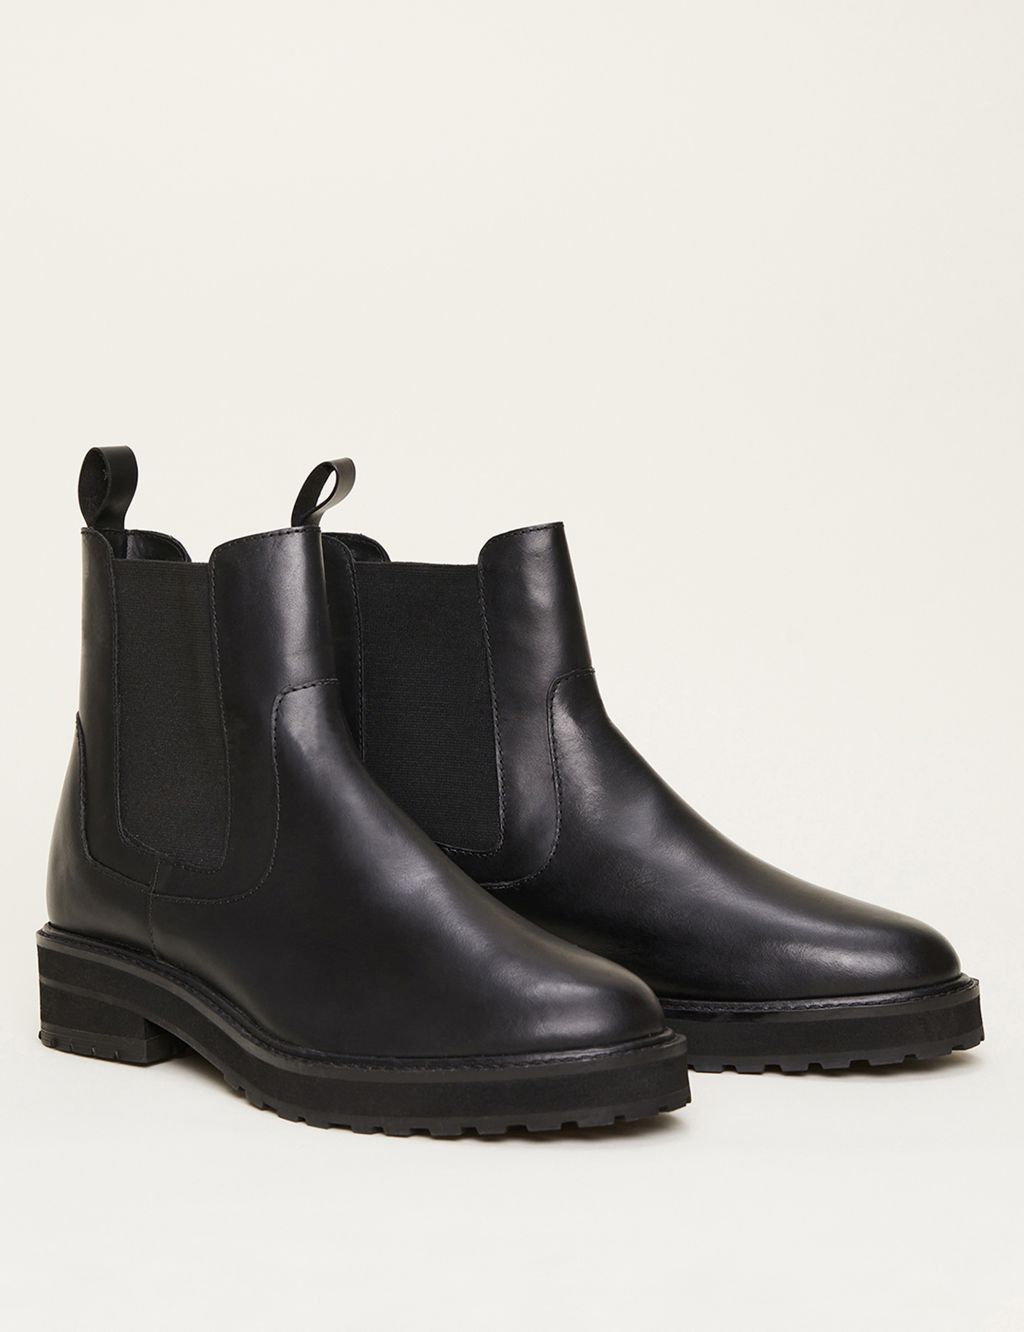 Leather Chelsea Flat Boots image 2